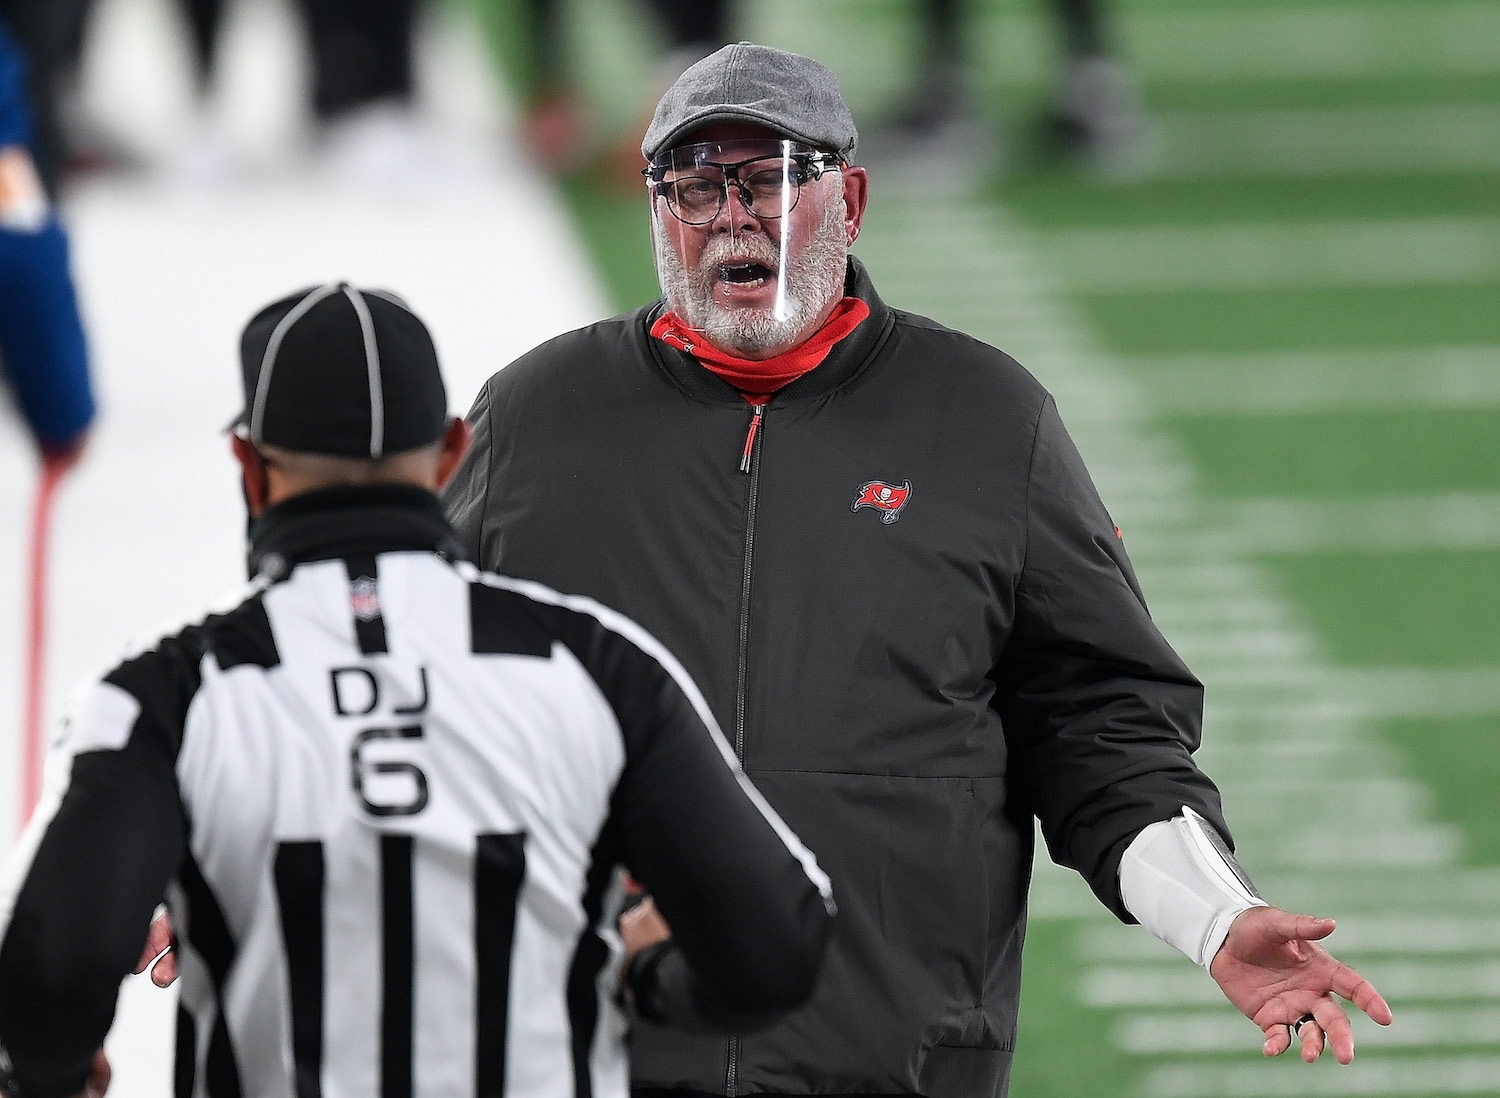 Bruce Arians Is Prepared to Make a Personal Change to Help His Tampa Bay  Buccaneers Team Win Another Super Bowl Title: 'I'm Going to Have to Be  Harder'